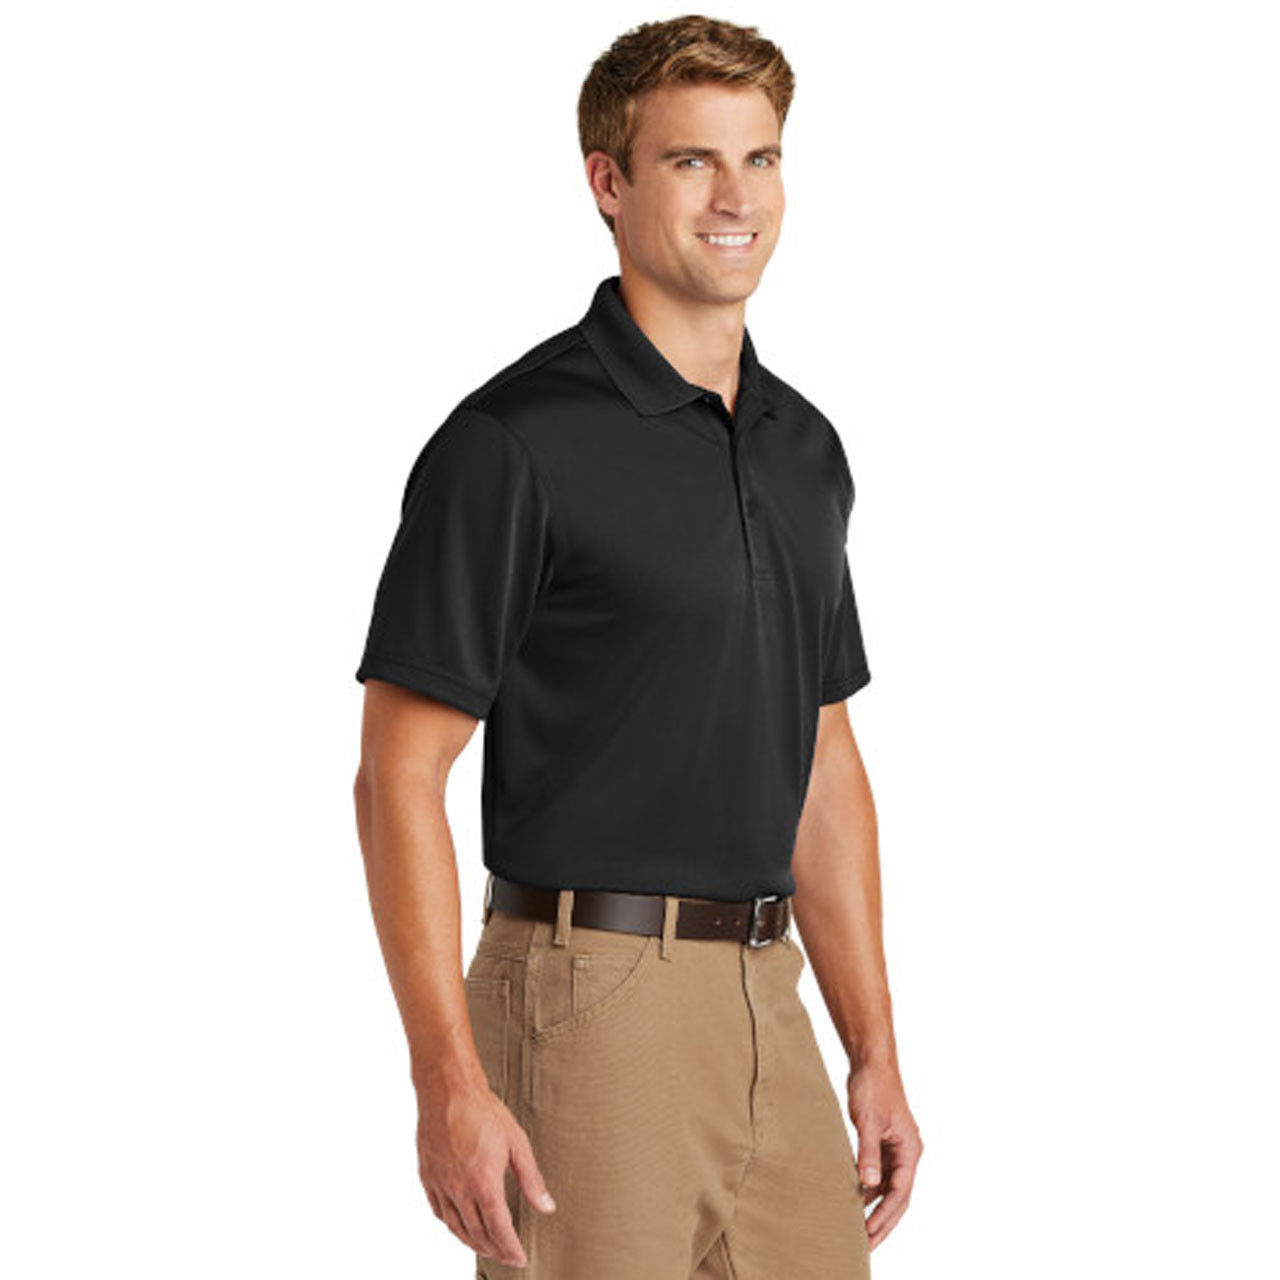 How many buttons does the placket of the men's black polo shirt have?